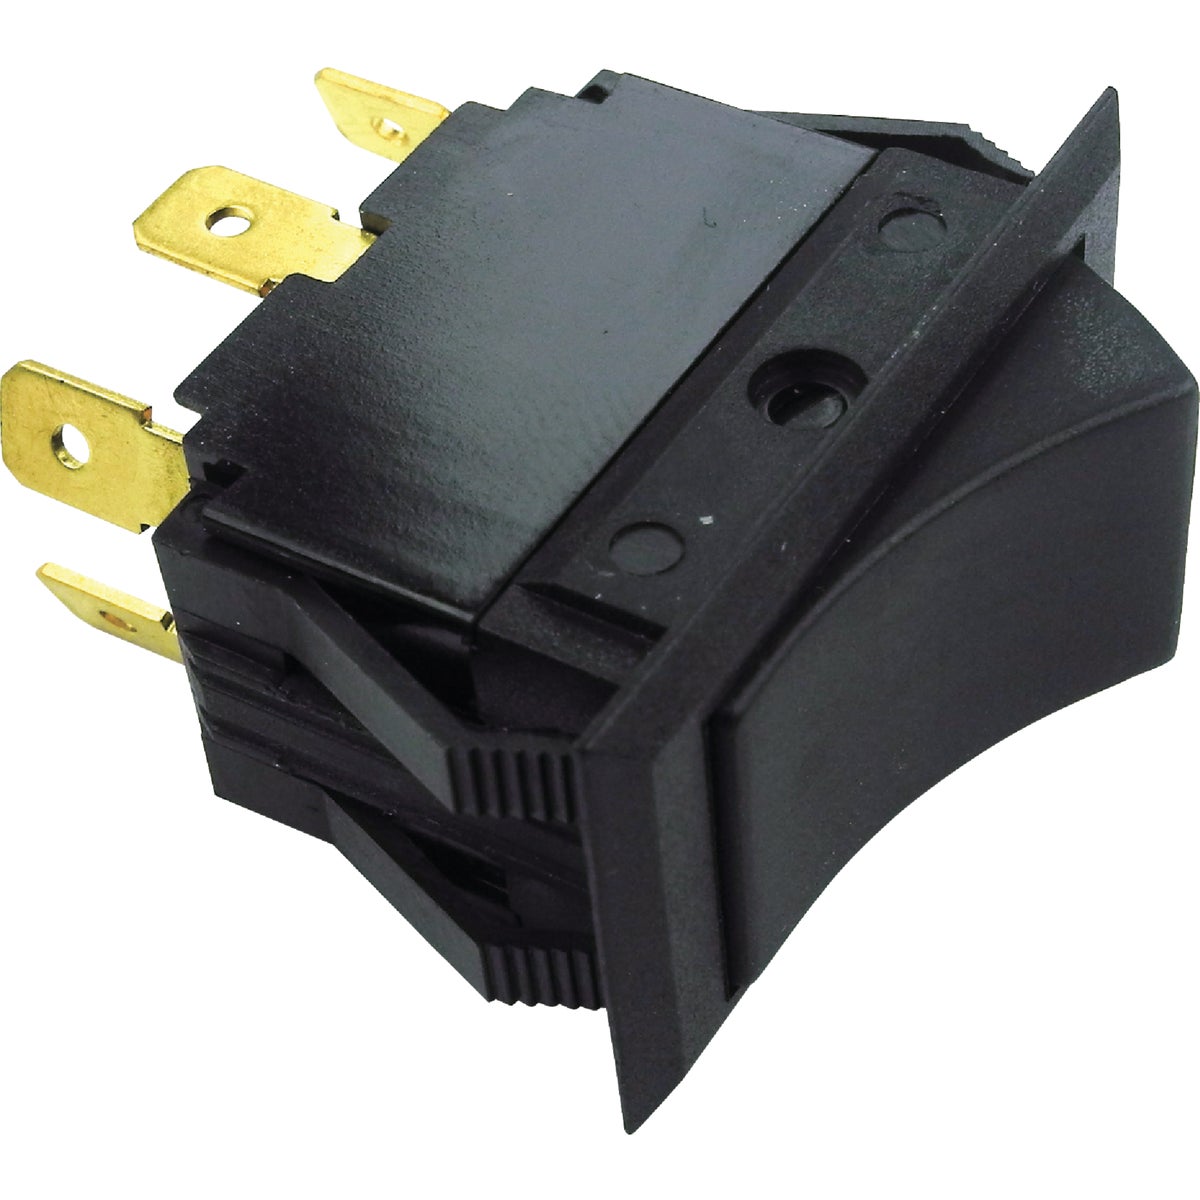 Item 587818, 3-position rocker switch featuring snap mount thermo plastic housing.